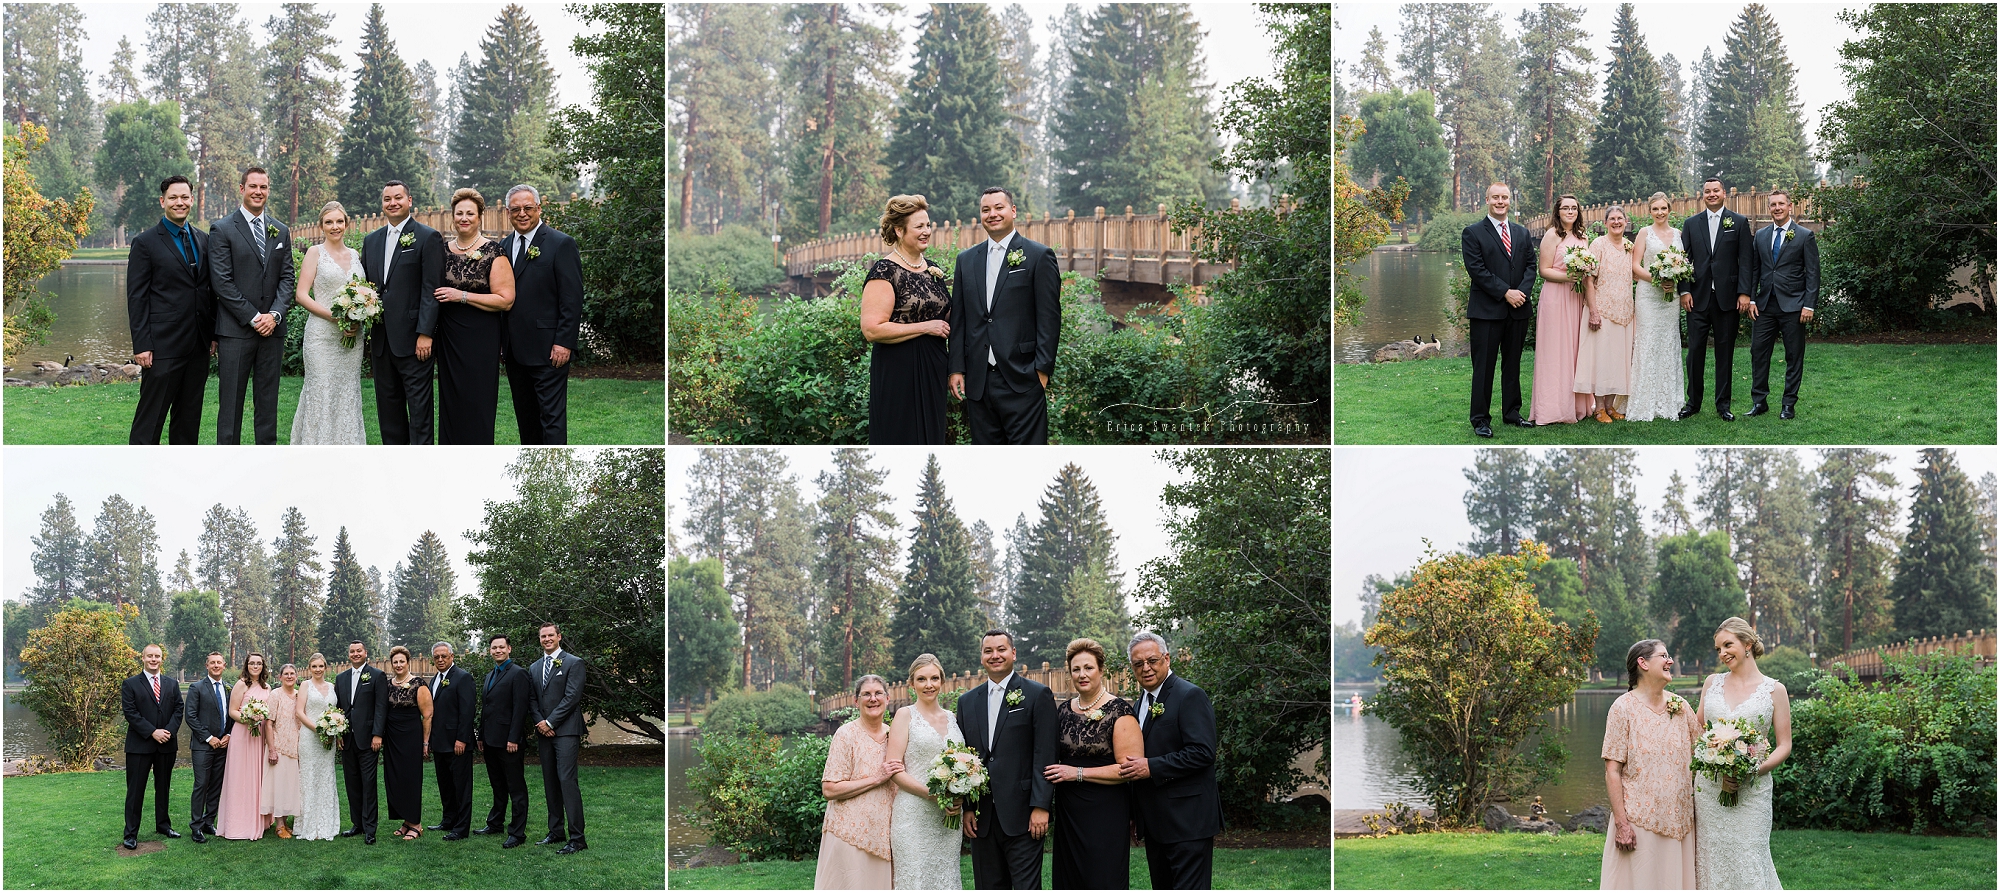 Deschutes Brewery Wedding Family Formal Portrait Session.  | Erica Swantek Photography